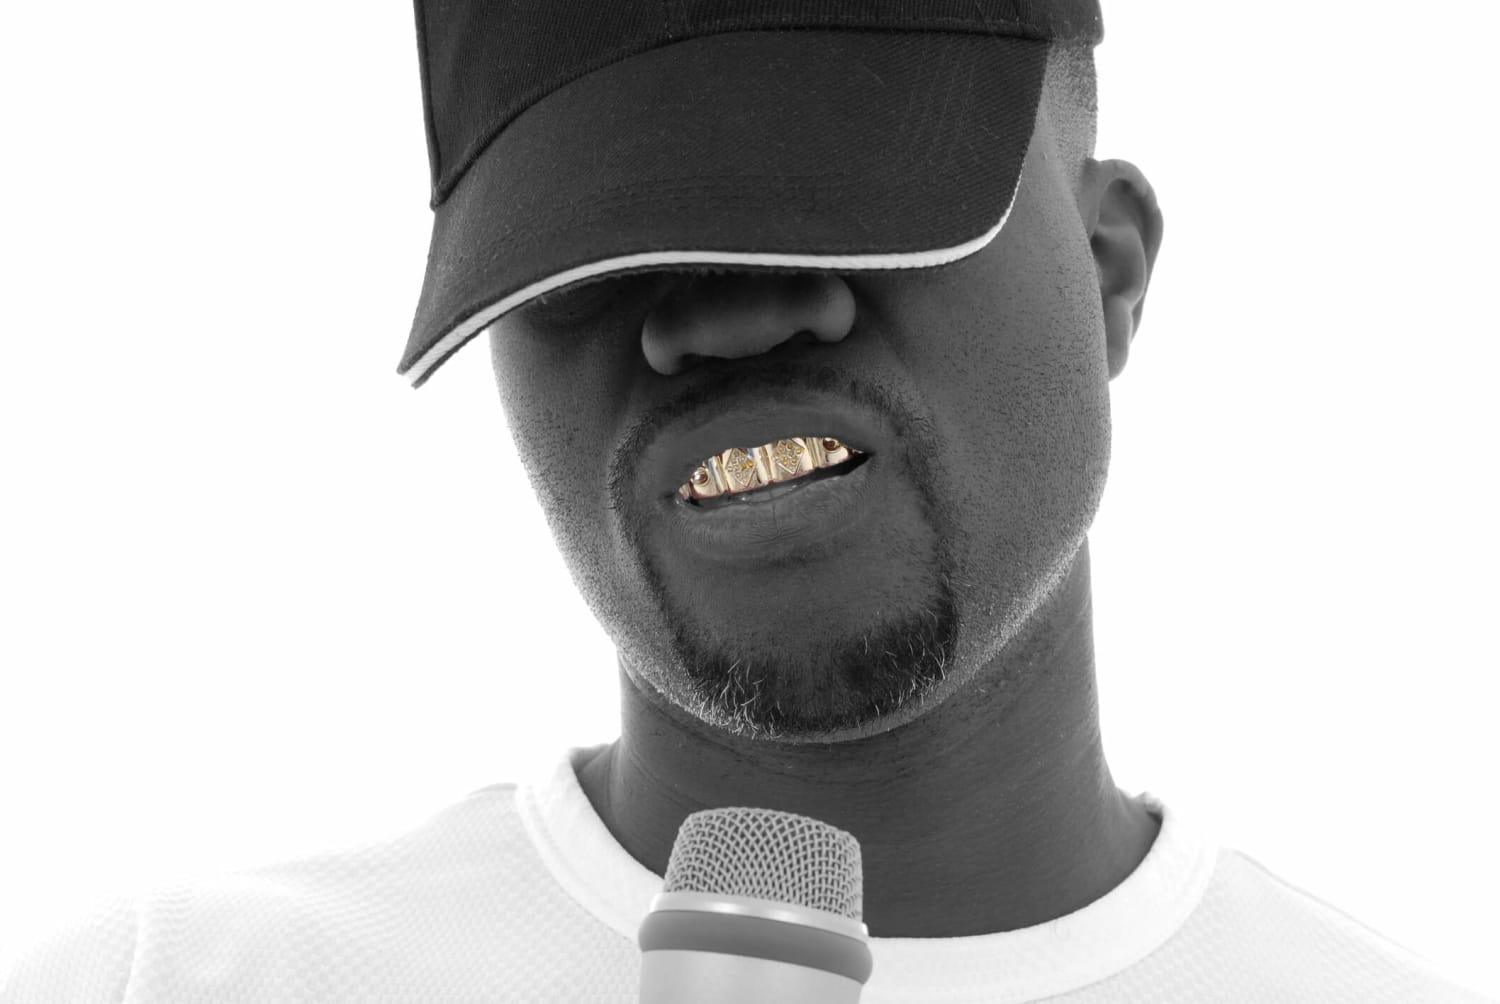 GRILLZ: HOW THEY BECAME A HIP-HOP CULTURE ICON - Seattle Gold Grillz